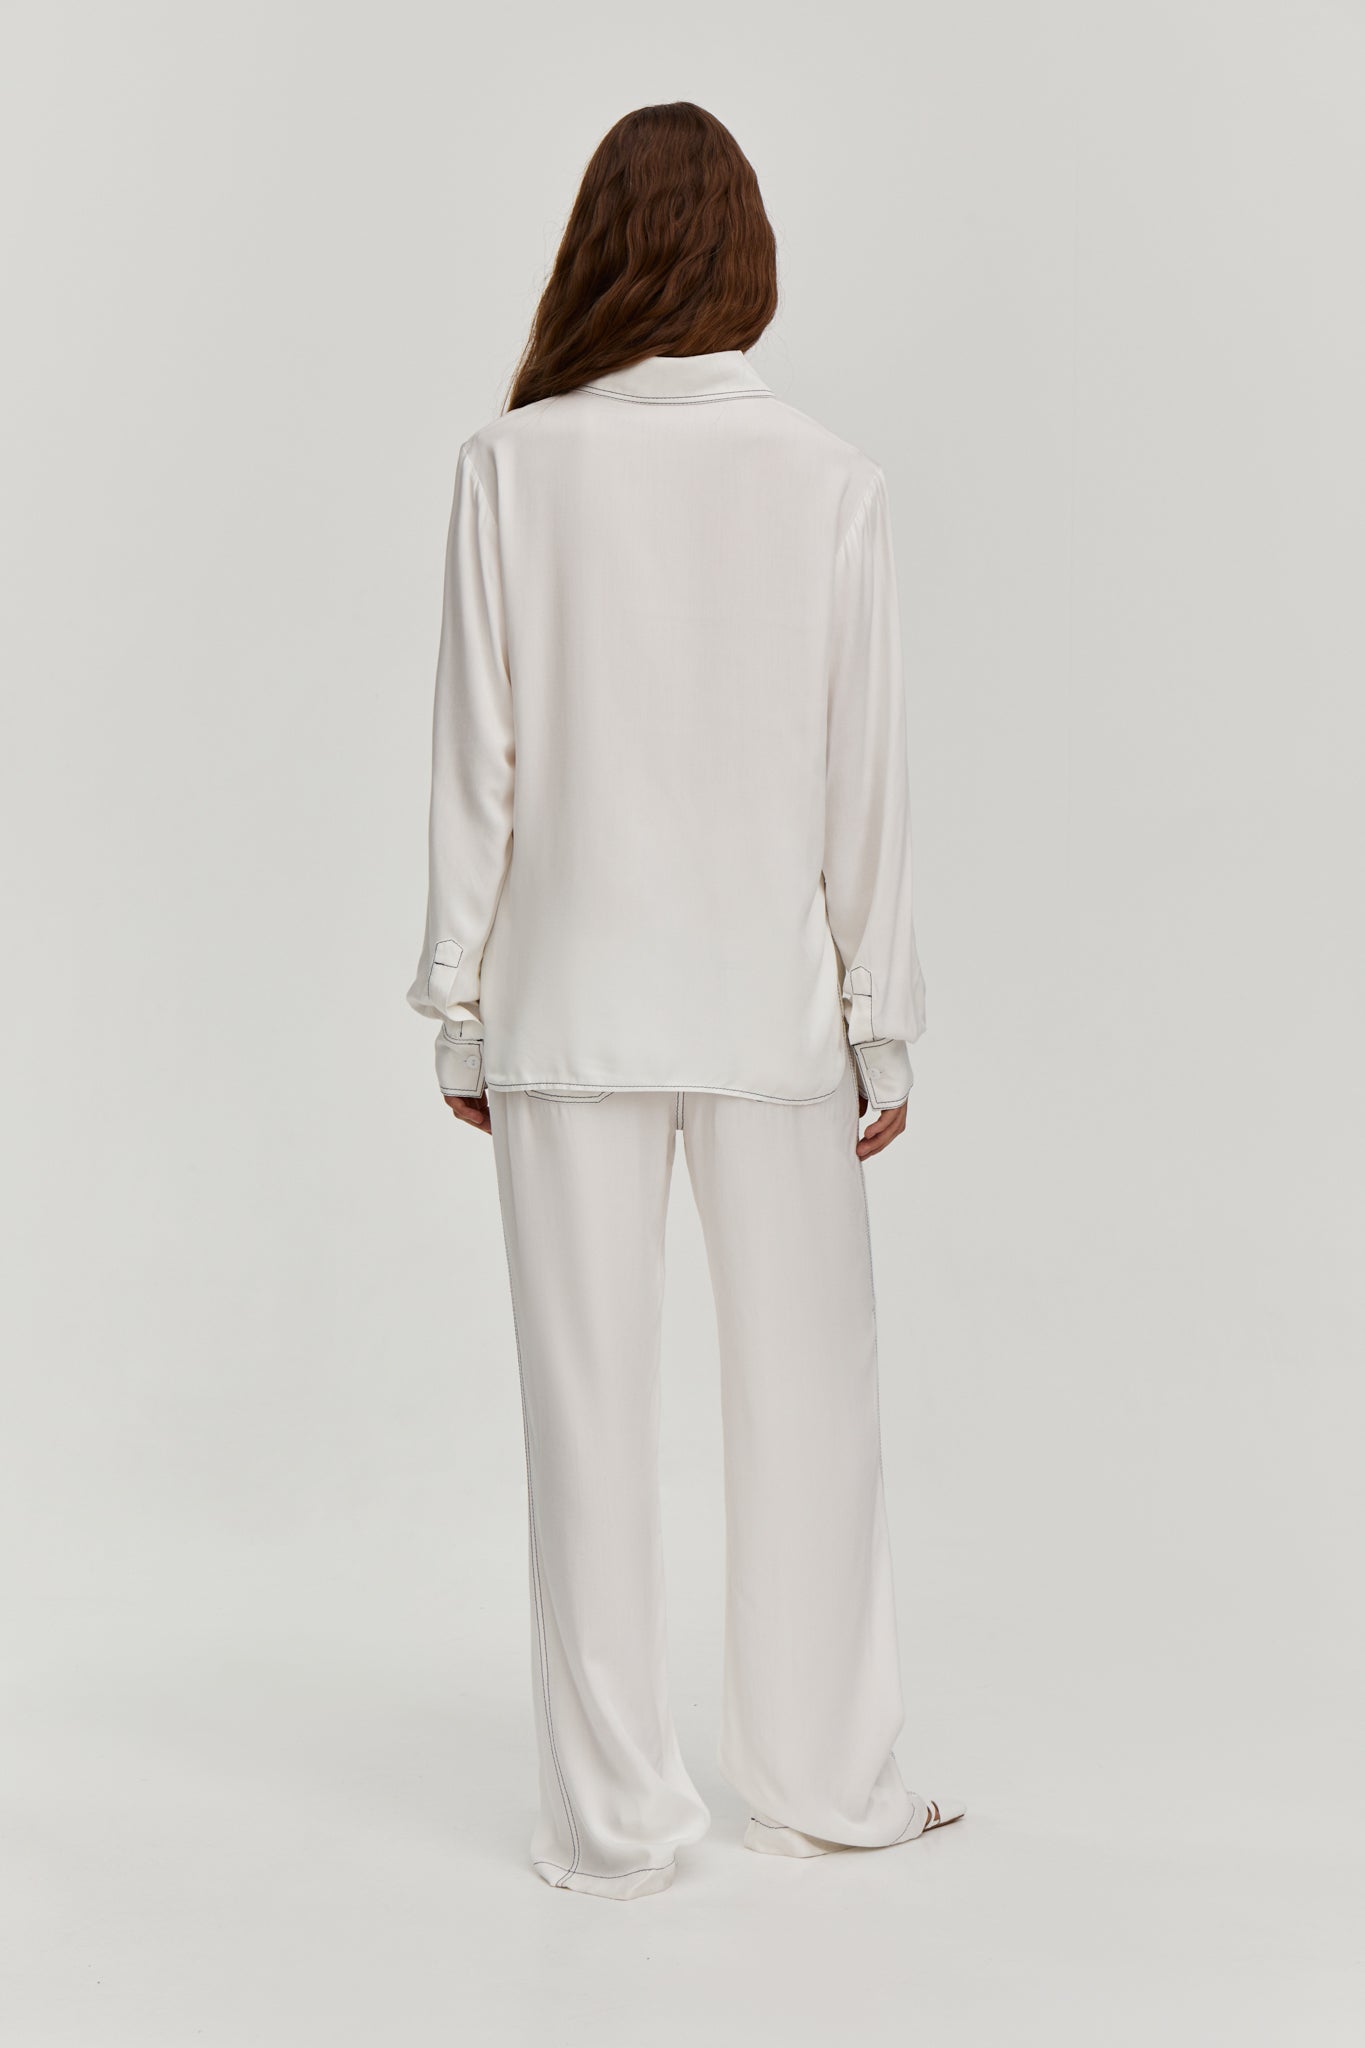 Viscose milky-white contrast-stitch straight trousers from FORMA featuring a mid-rise elasticated waistband